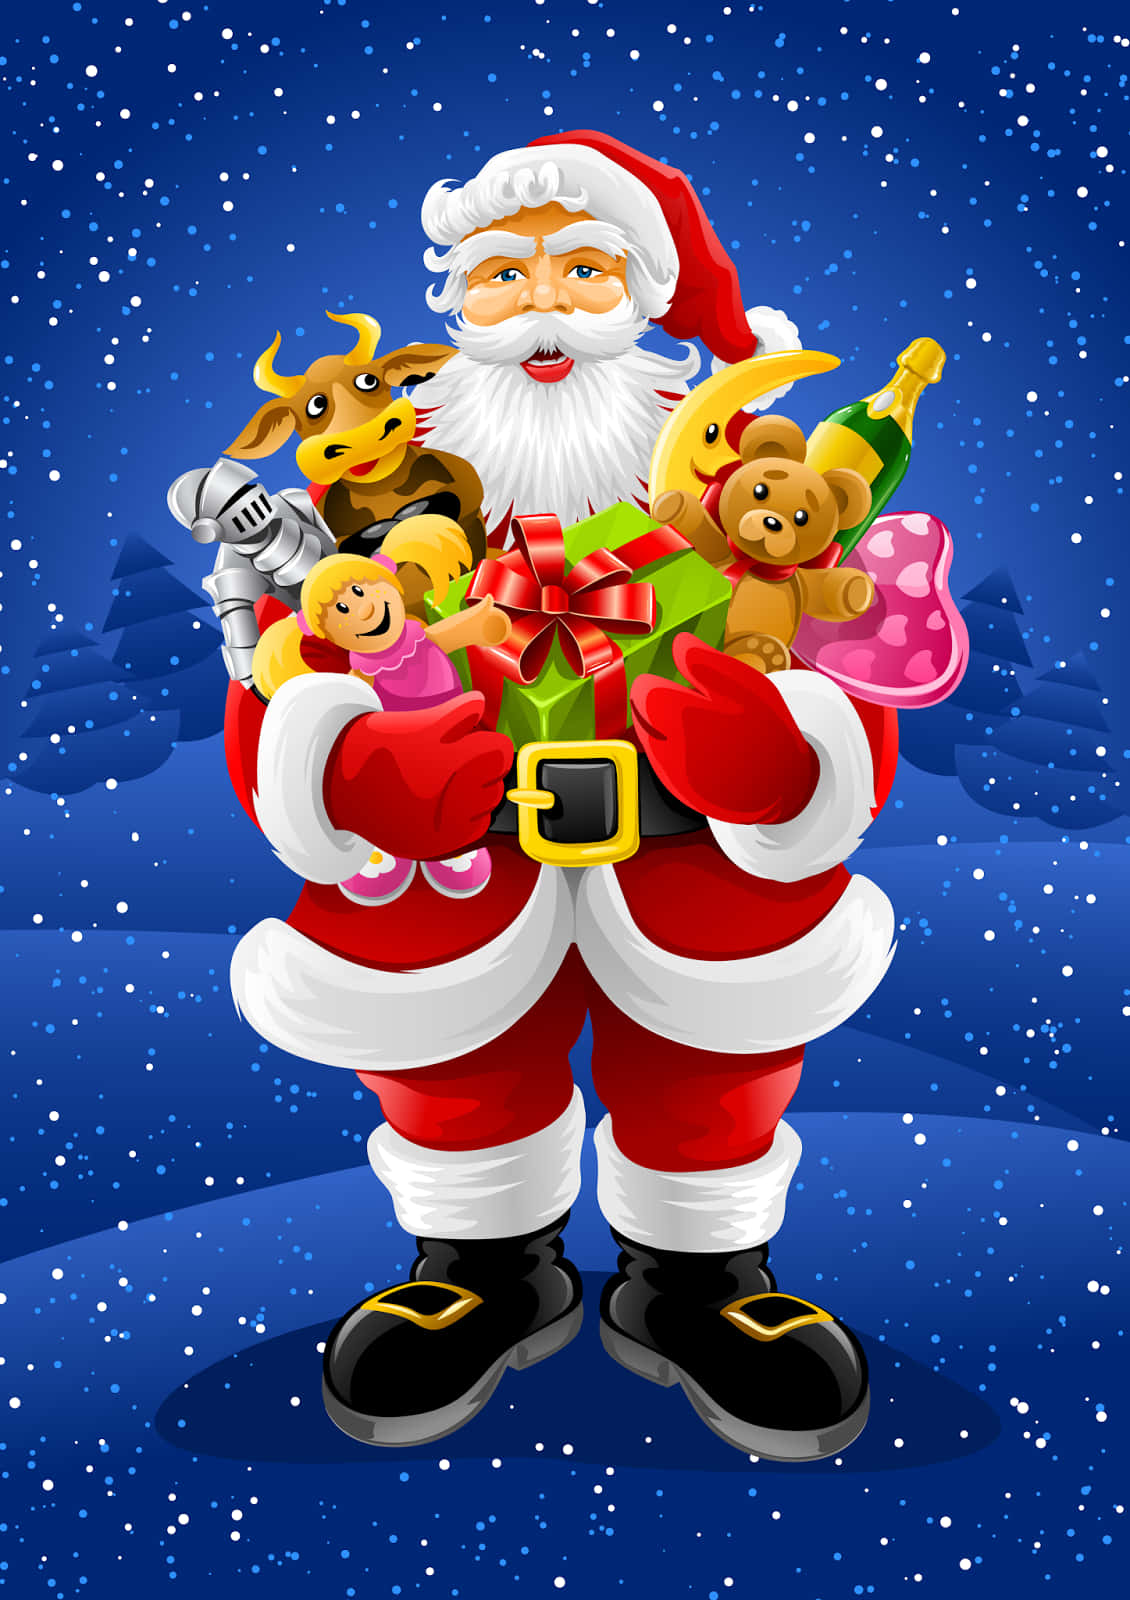 A jolly Santa Claus in a festive red and white suit, ready to bring cheer this holiday season. Wallpaper